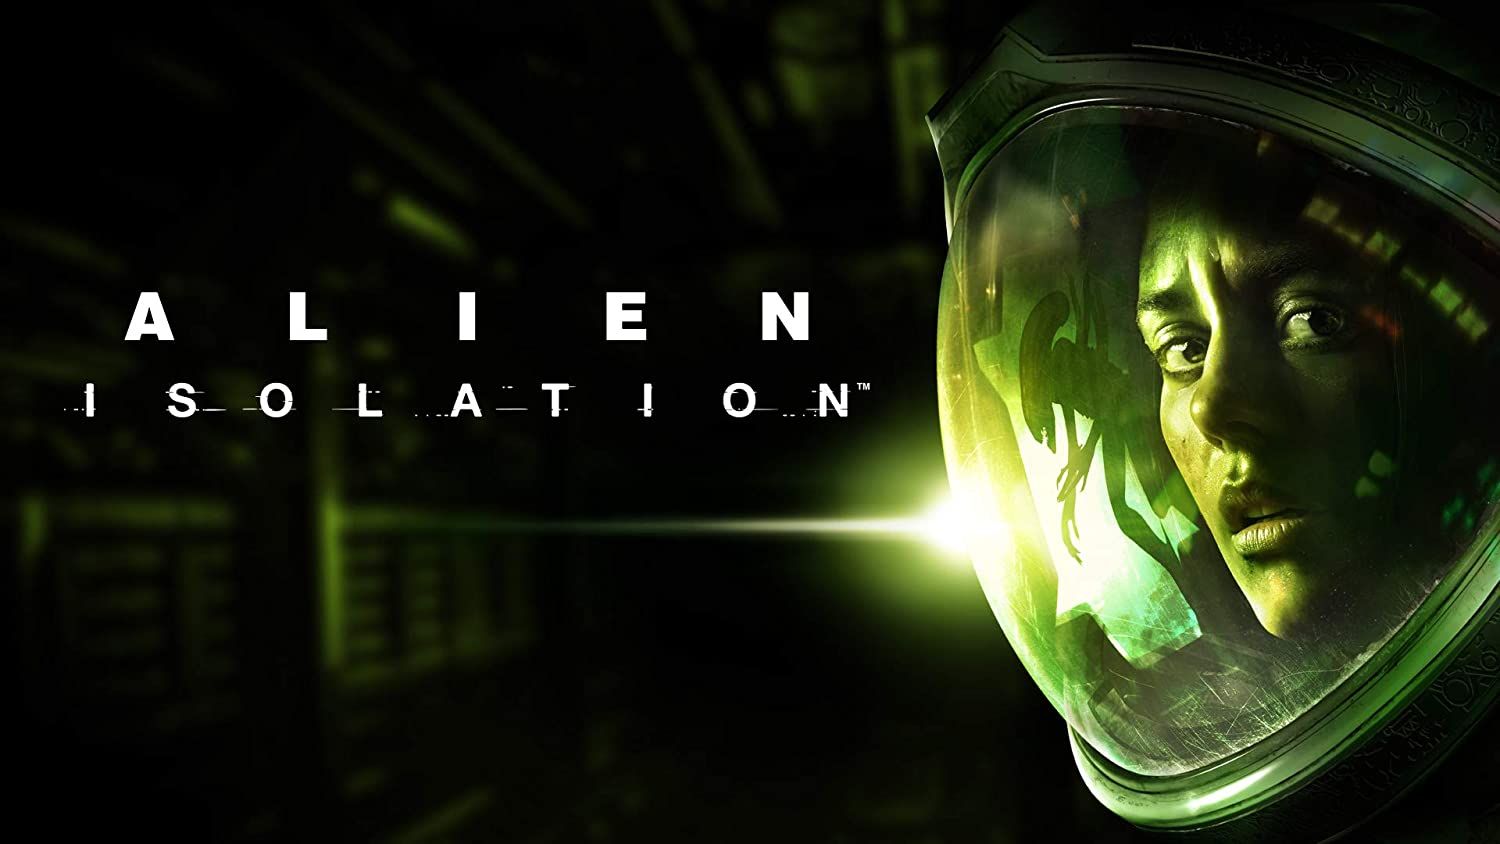 Alien Isolation key art: Main character looks scared next to the game title.